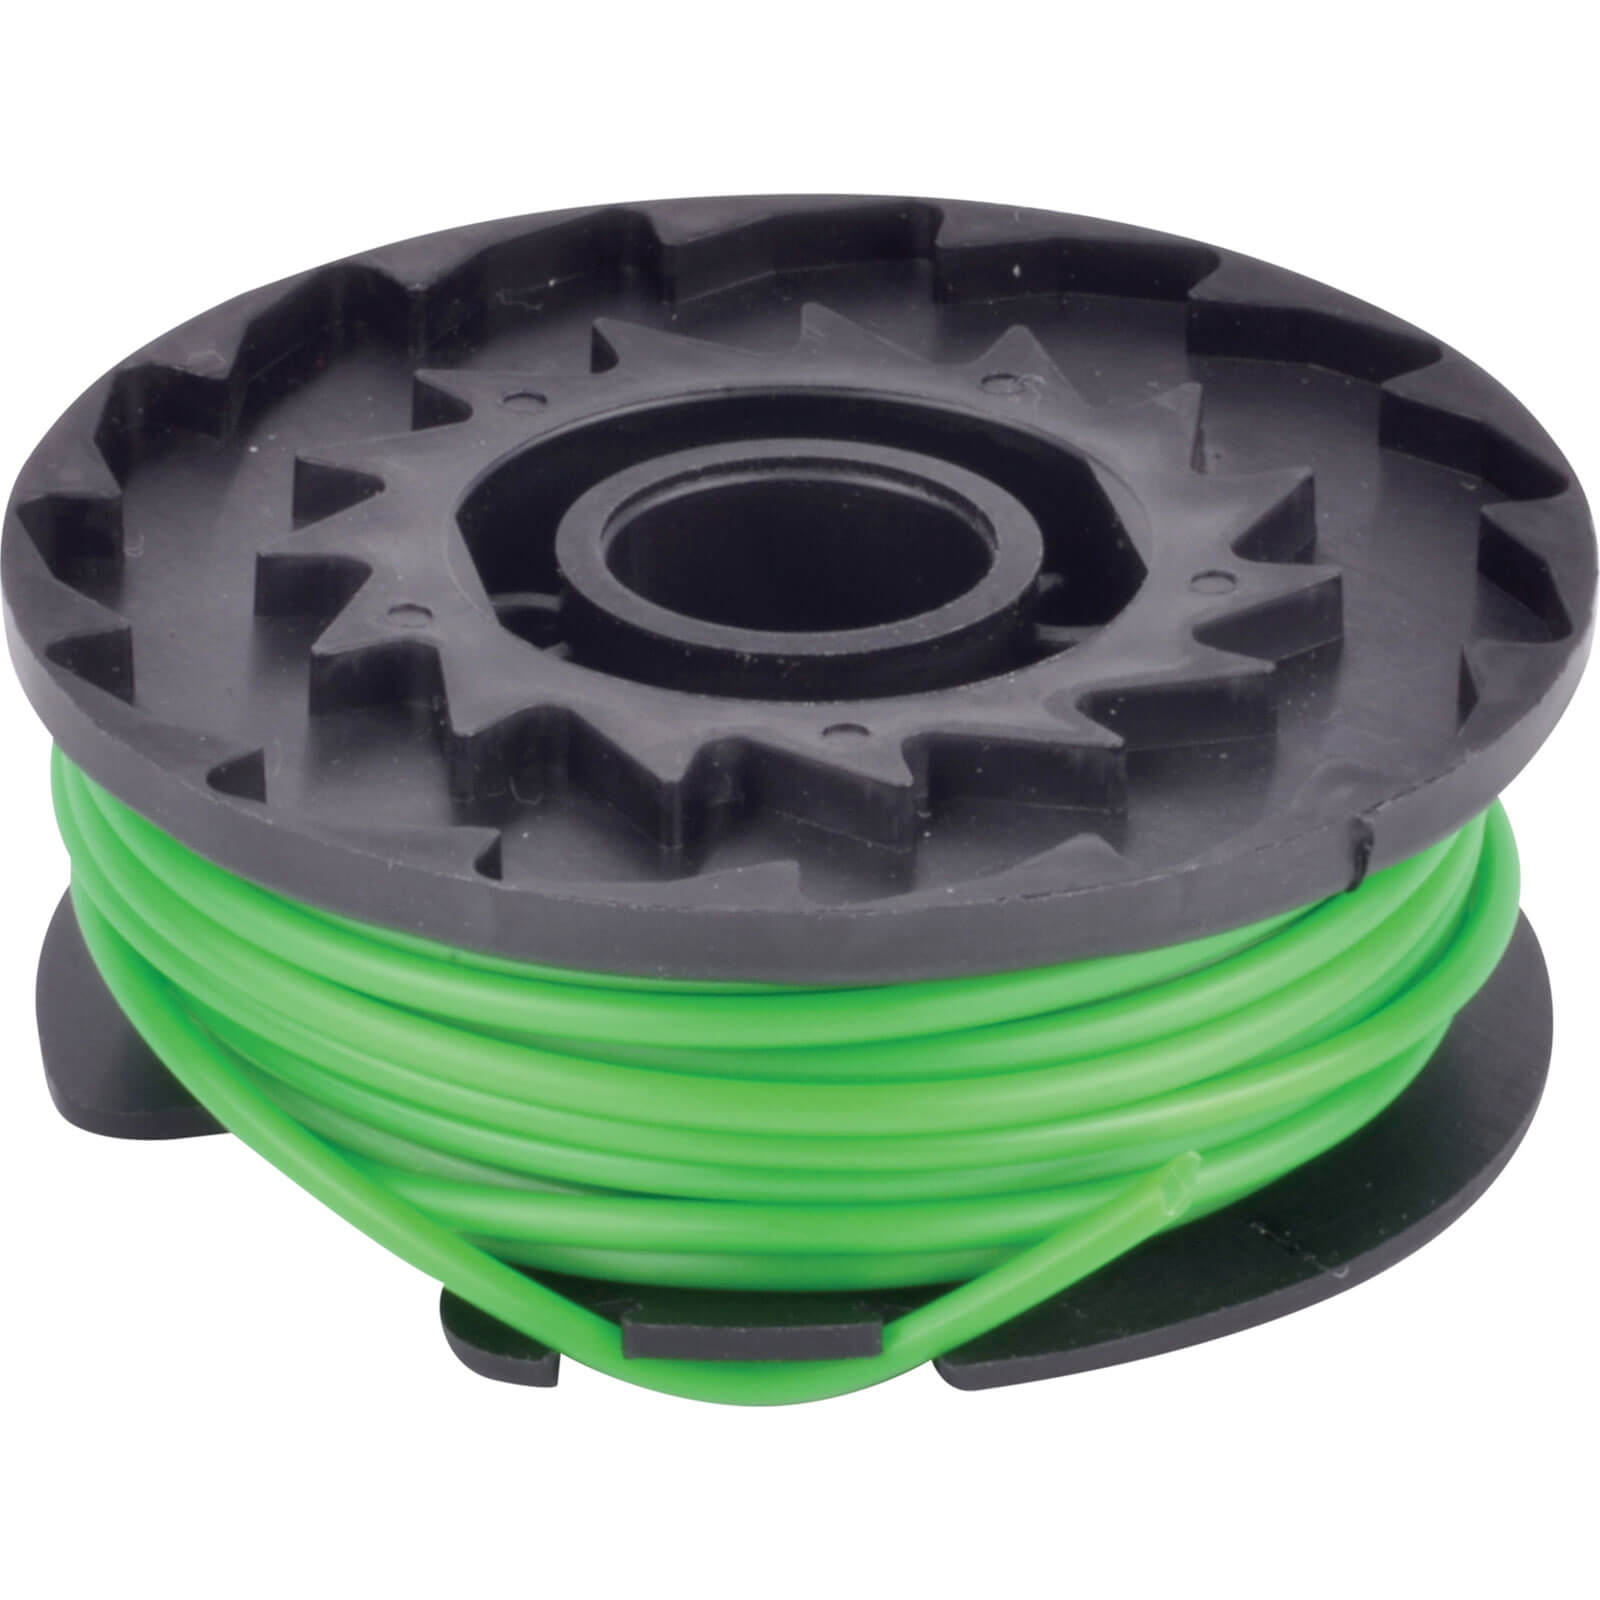 Photo of Alm 2mm X 6m Spool And Line For Worx Wg168 Grass Trimmer Pack Of 1